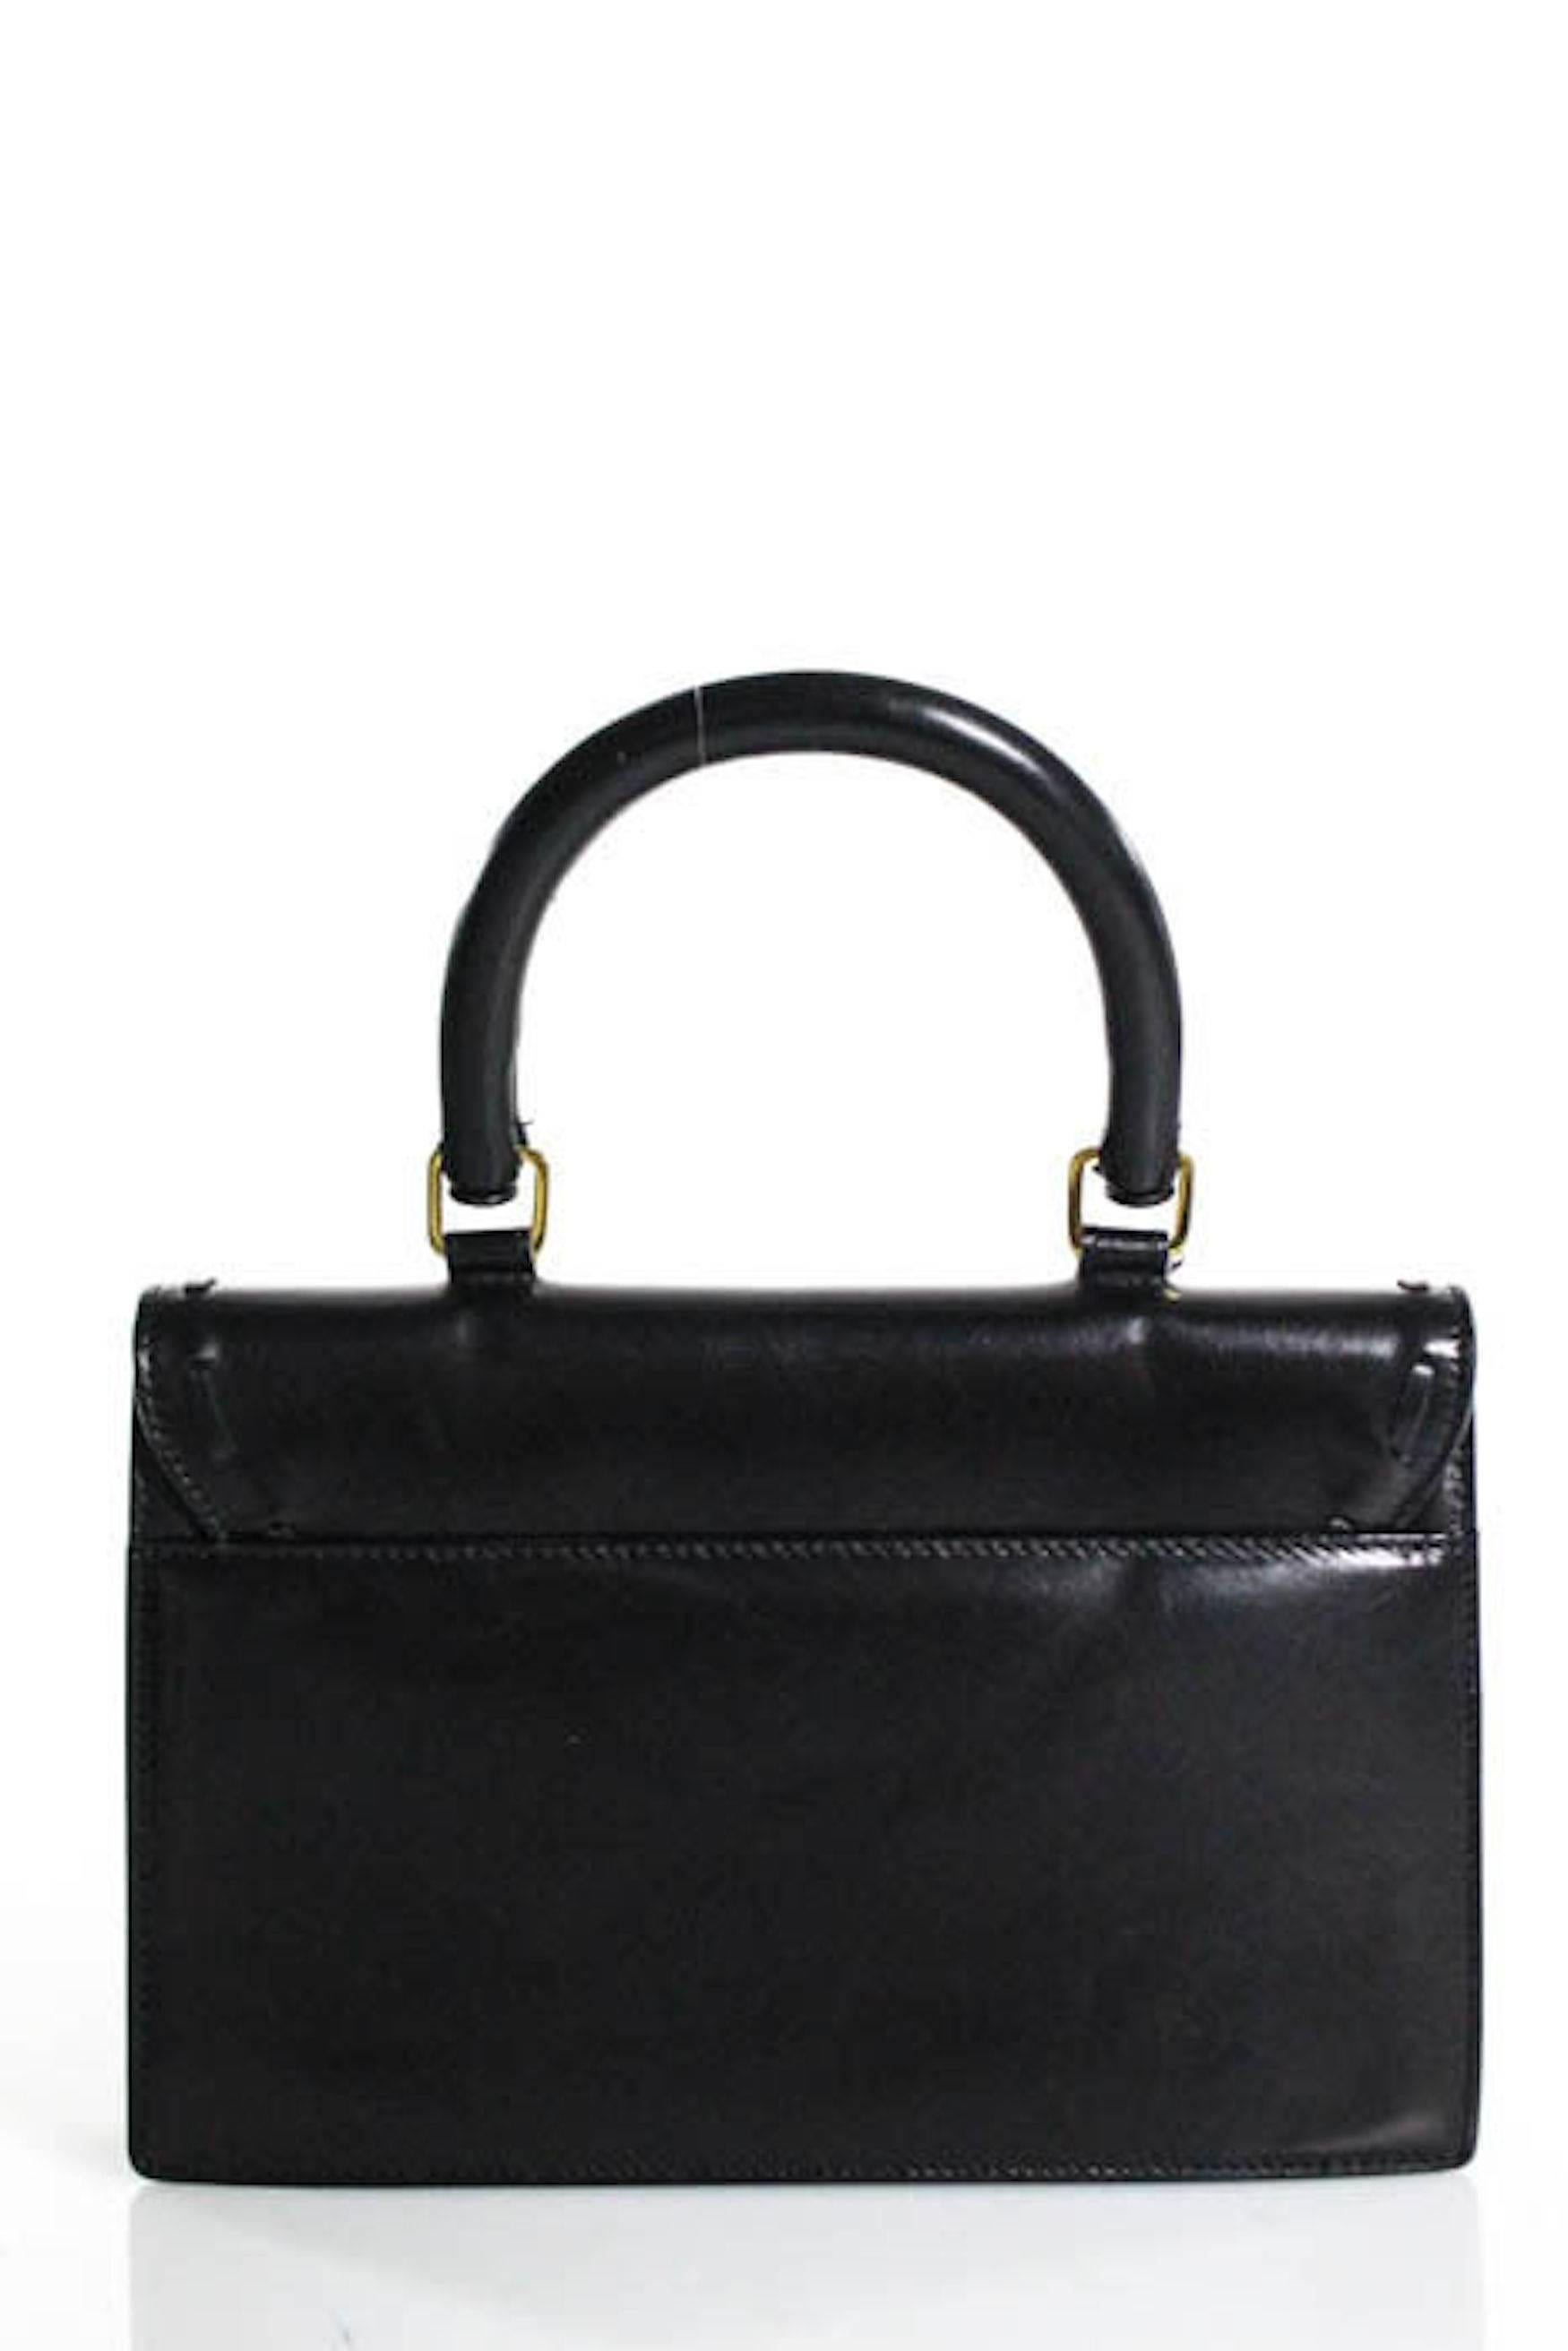 Bottega Veneta Vintage Black Leather Kelly Style Stitch Top Handle Flap Bag In Good Condition In Chicago, IL